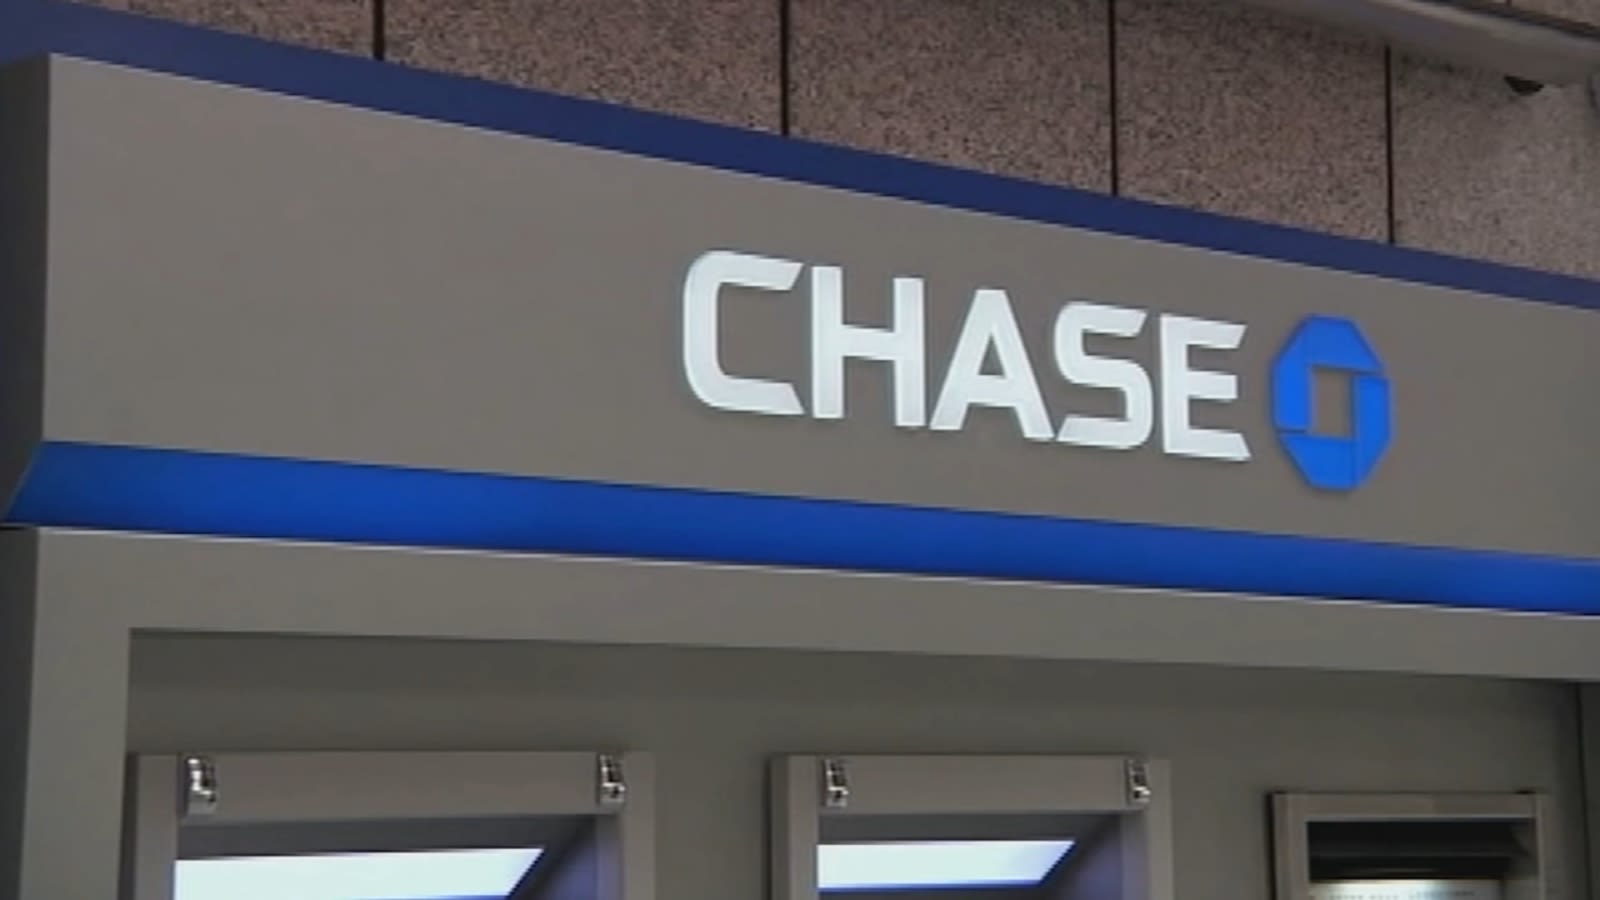 Former First Republic Bank customers say they can't access Chase accounts online after migration